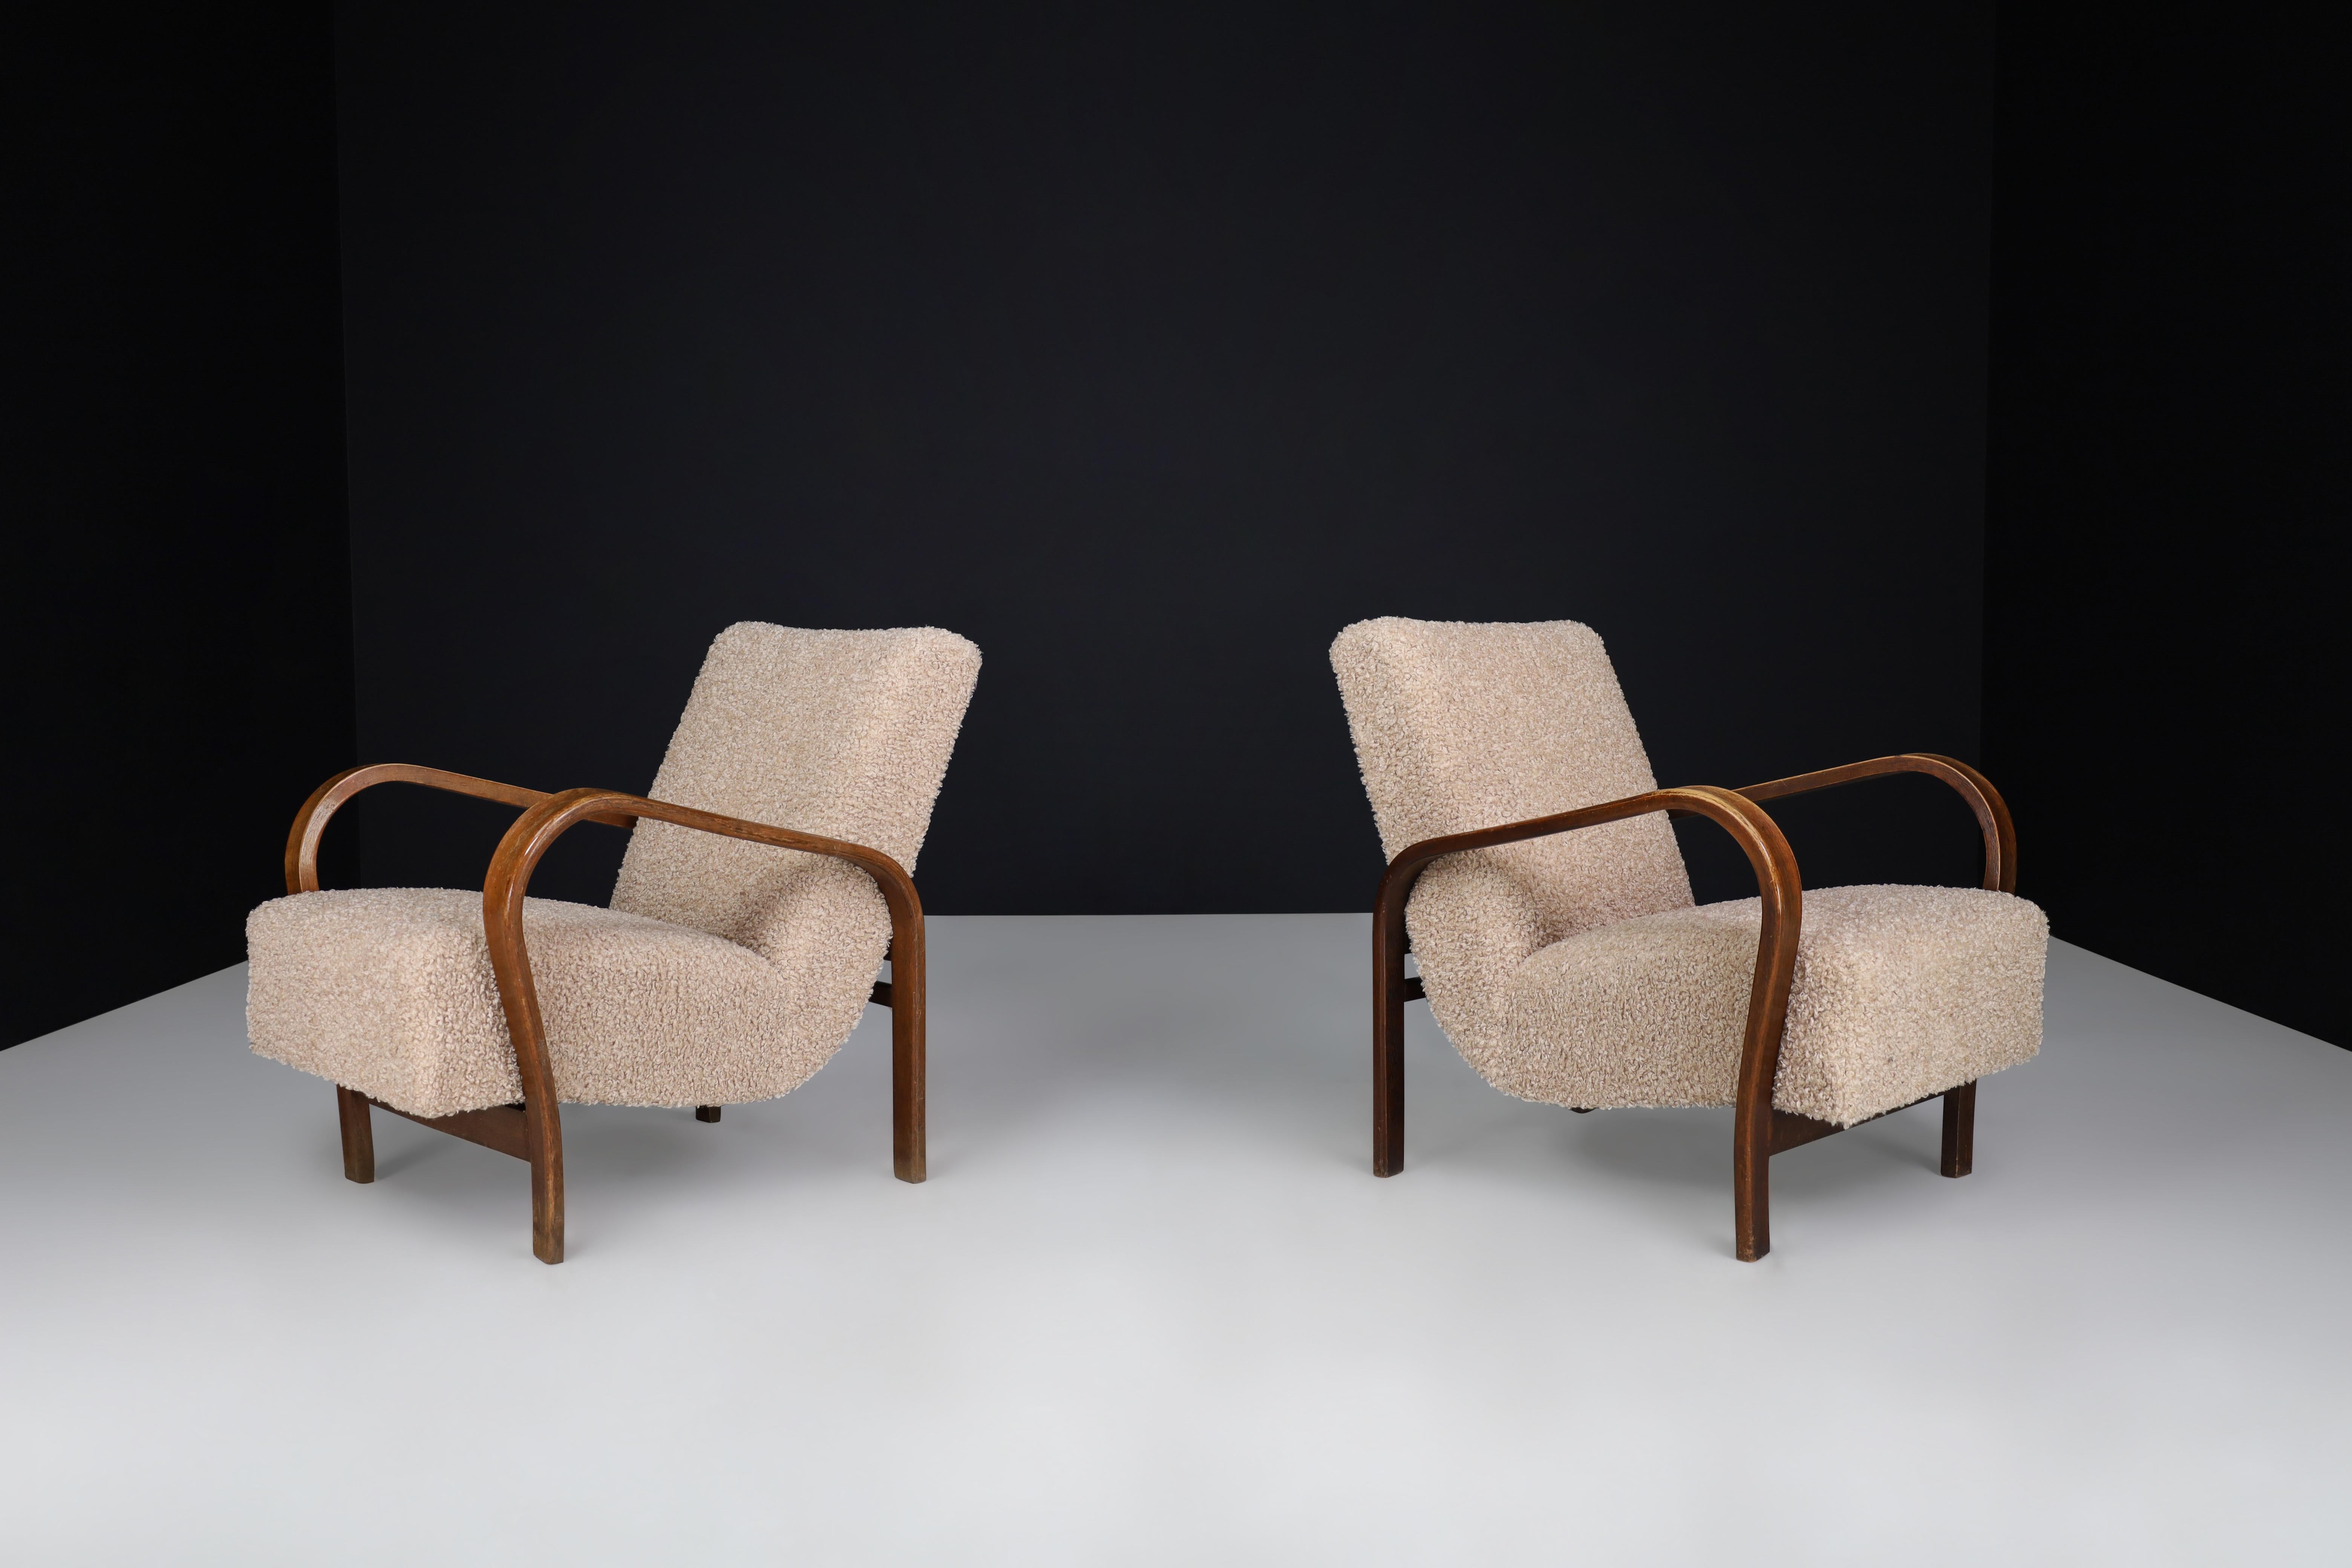 Karel Koželka & Antonín Kropáček re-upholstered bentwood Armchairs, Czechia 1940

We offer re-upholstered Karel Koželka & Antonín Kropáček bentwood armchairs, originally designed in Czechia circa 1940. These iconic chairs are a benchmark for